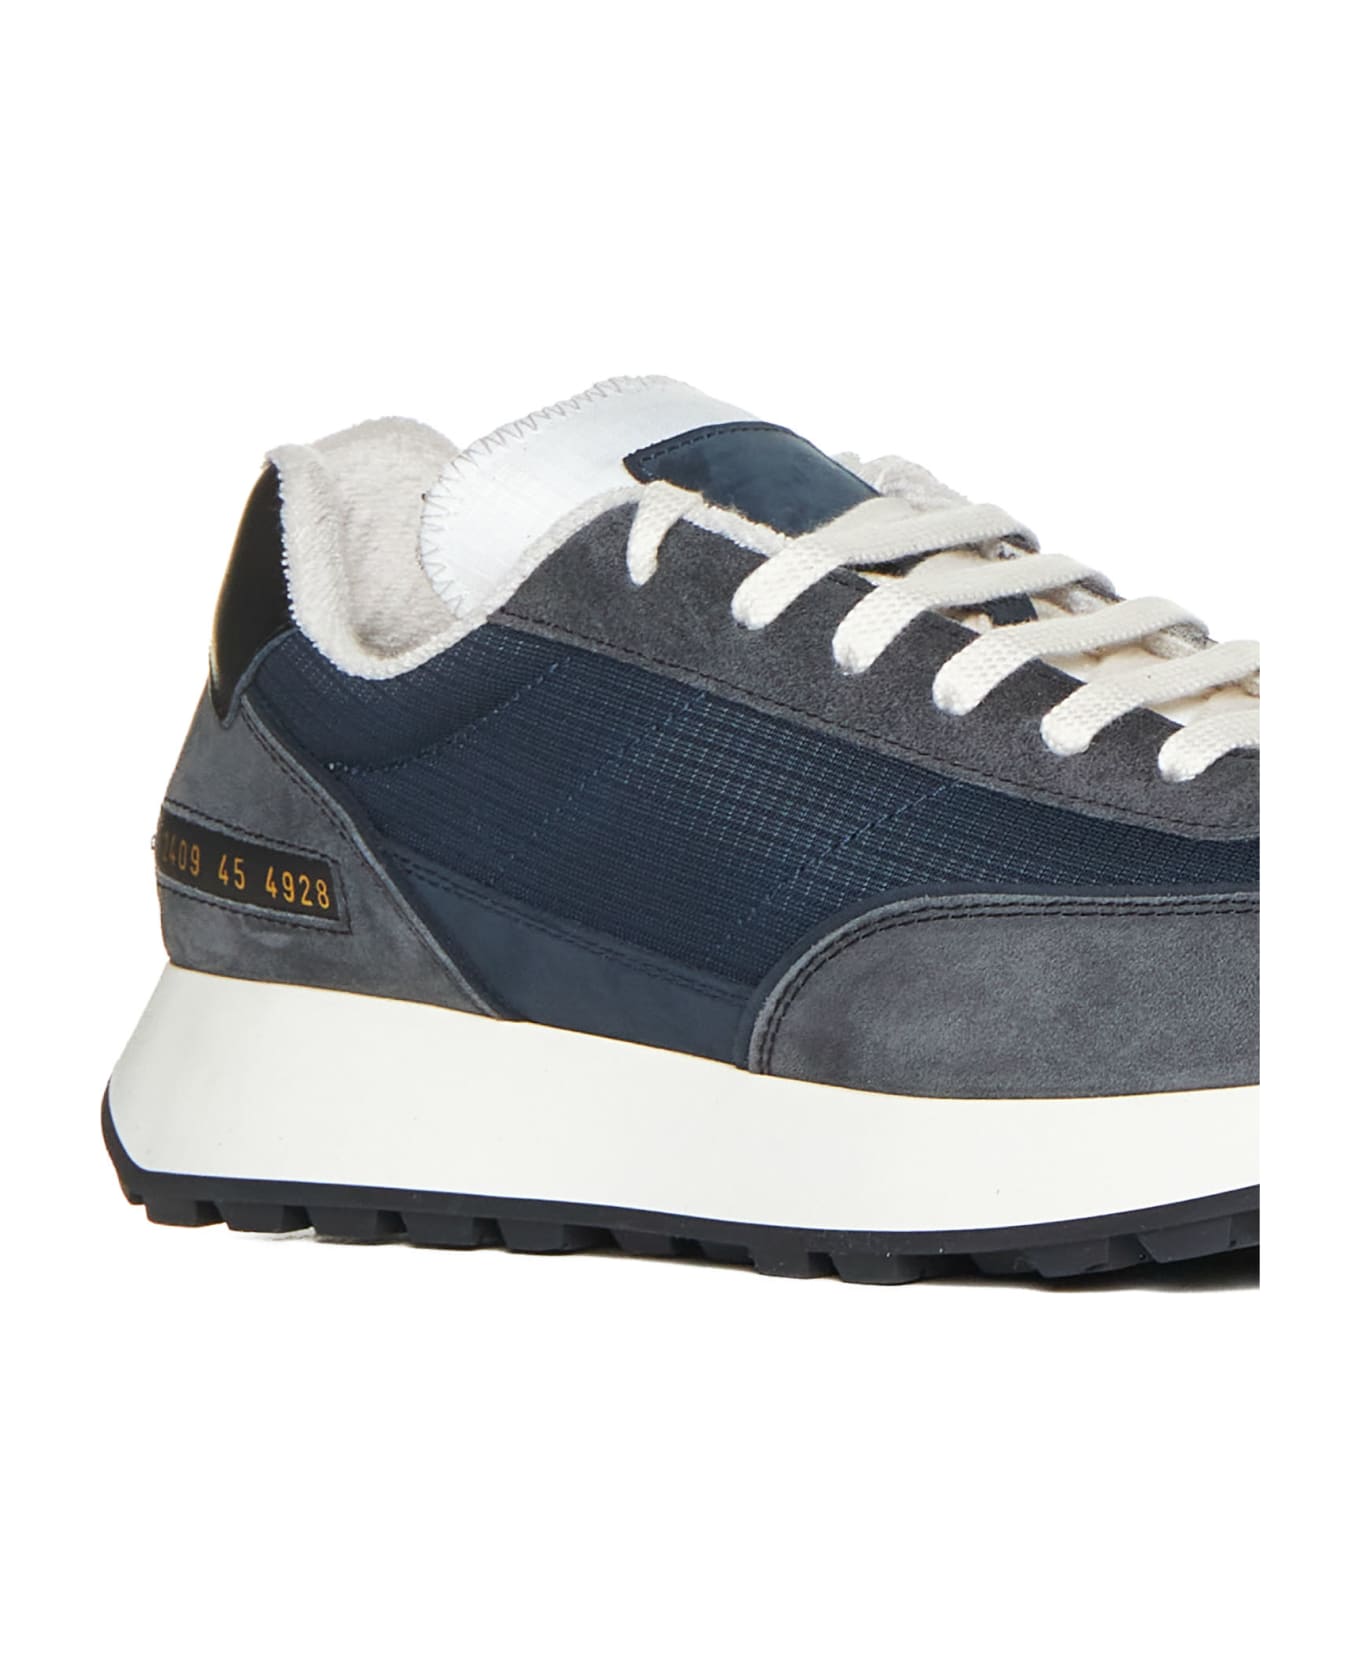 Common Projects Sneakers - Navy スニーカー